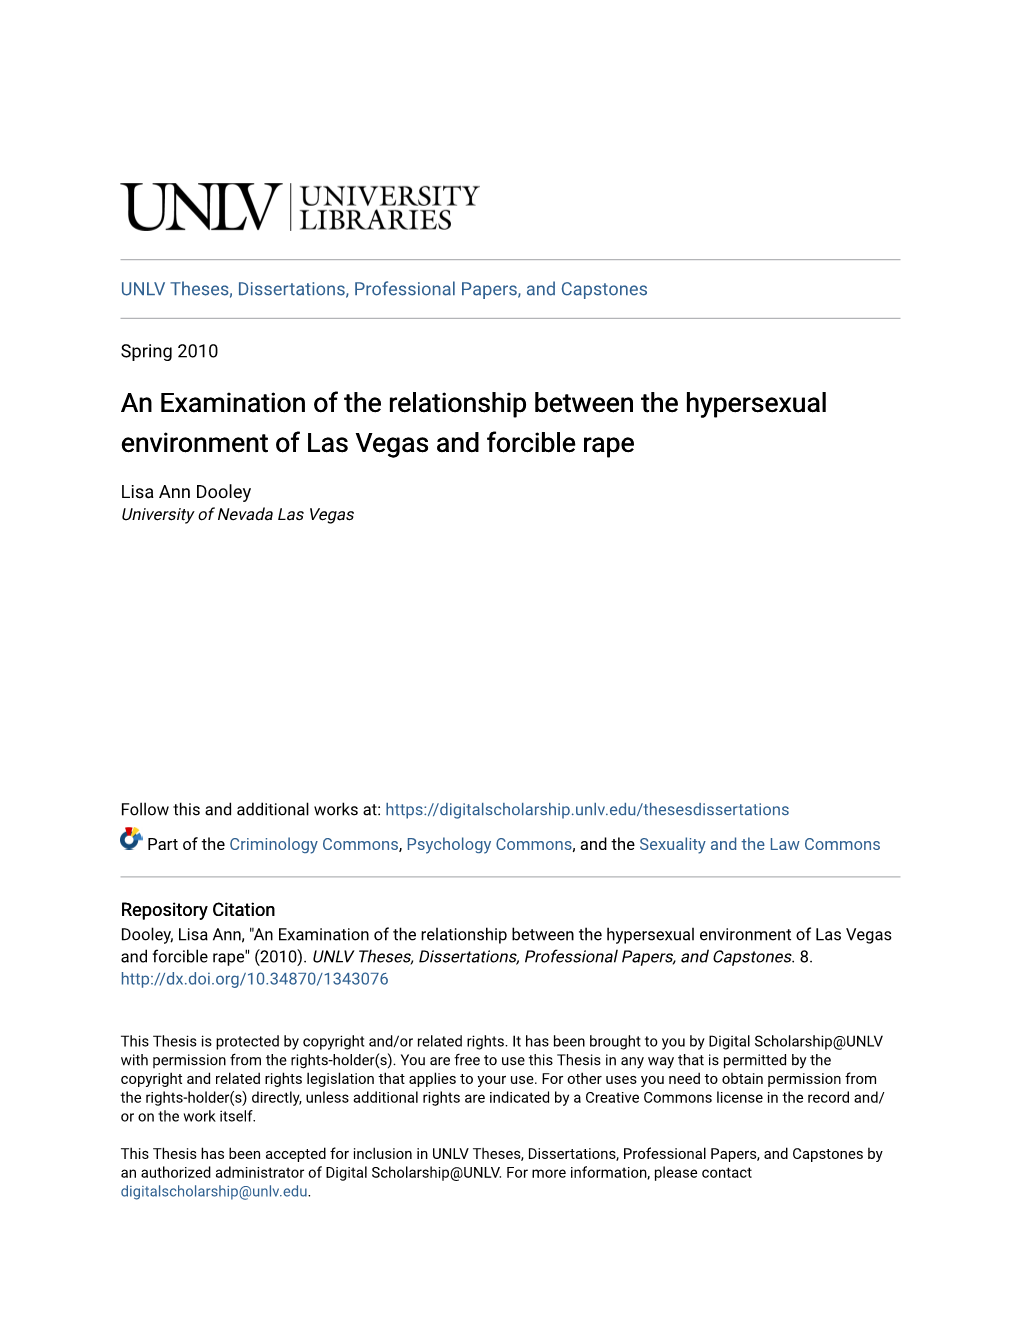 An Examination of the Relationship Between the Hypersexual Environment of Las Vegas and Forcible Rape